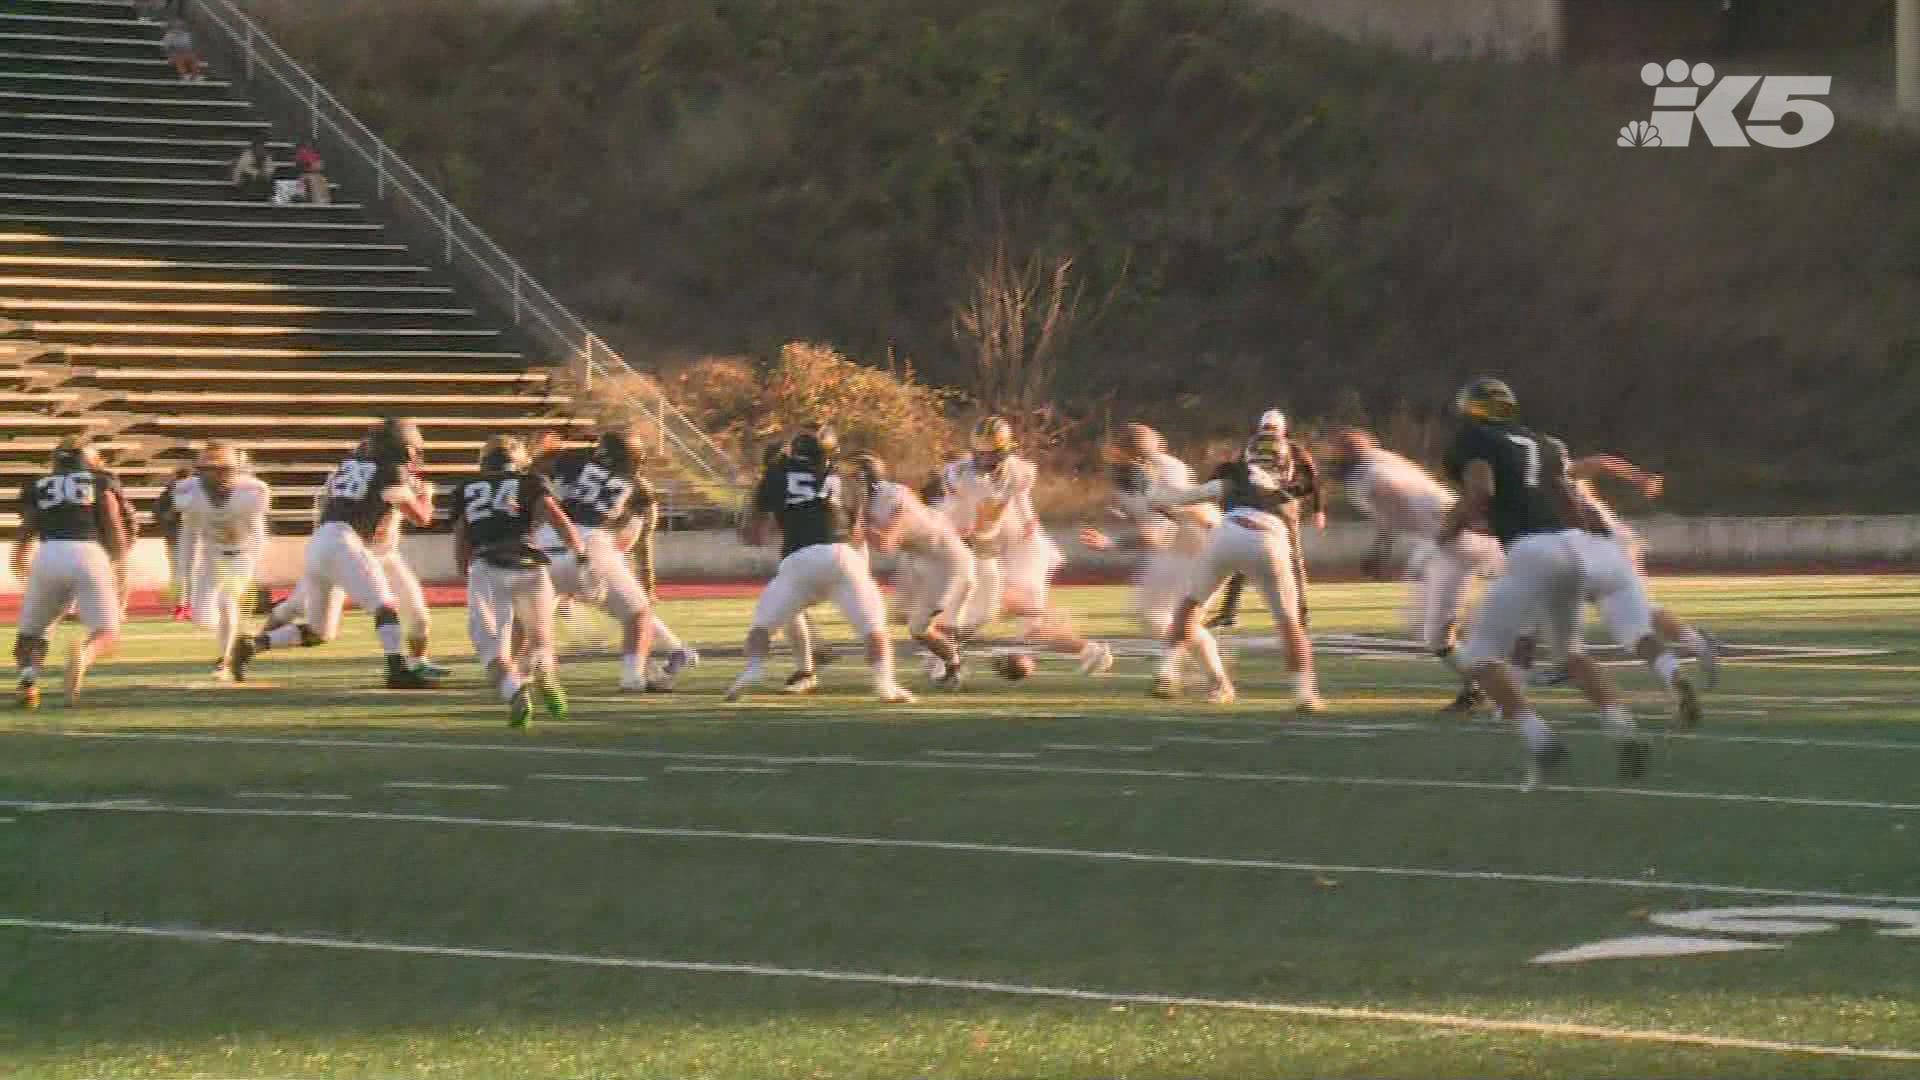 Highlights of Bellevue's 22-20 win over Lincoln (Tacoma) in the State Quarterfinals